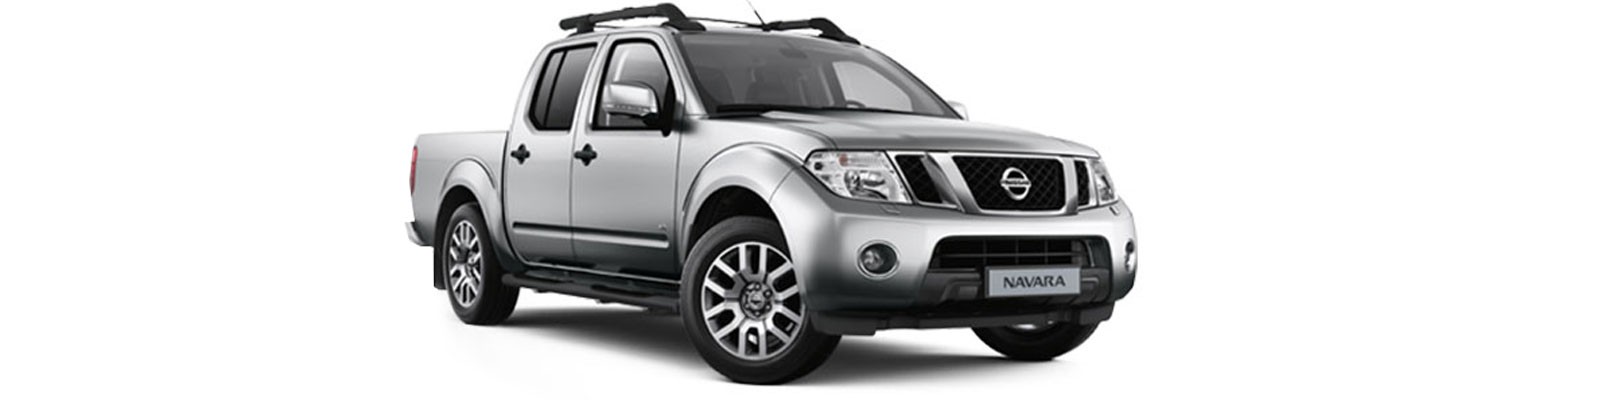 Accessories For Nissan D40 Navara Double Cab From 2010 To 2015